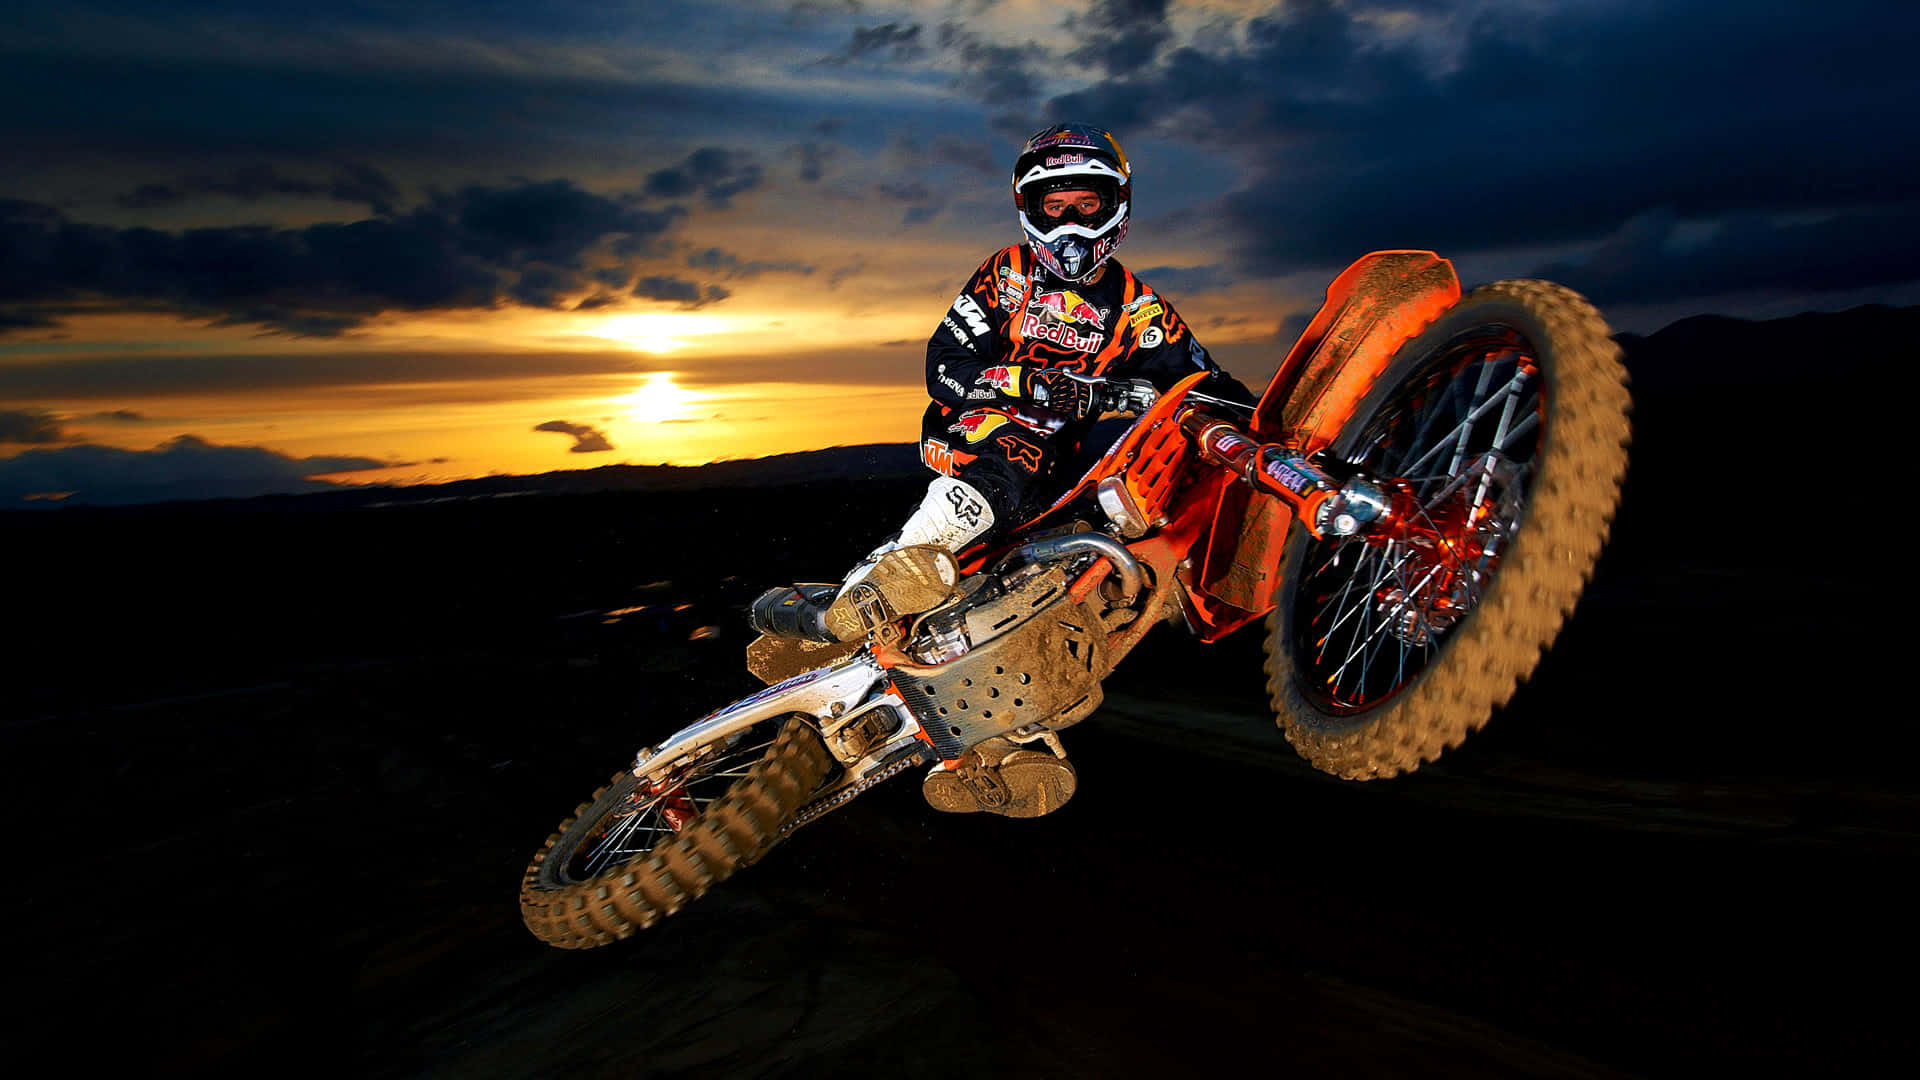 Breathtaking Motocross action on a dirt track